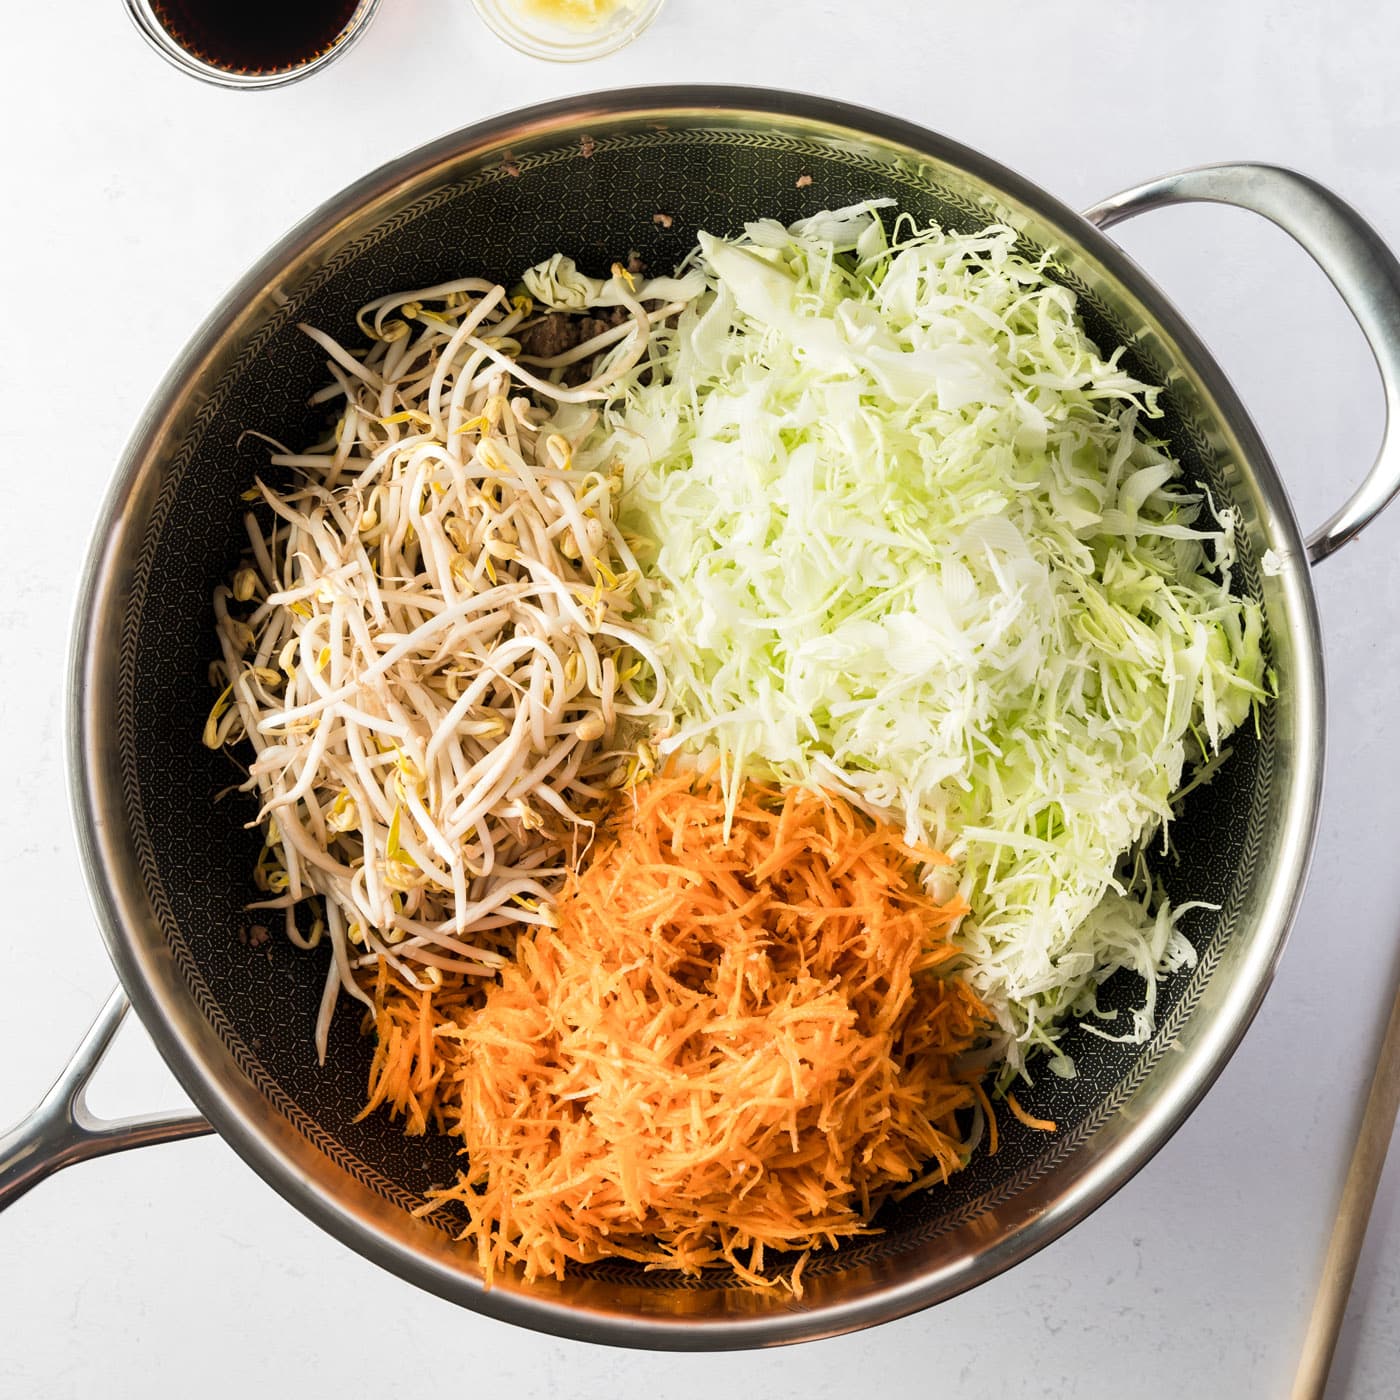 cabbage, carrots, and mung bean sprouts in a skillet